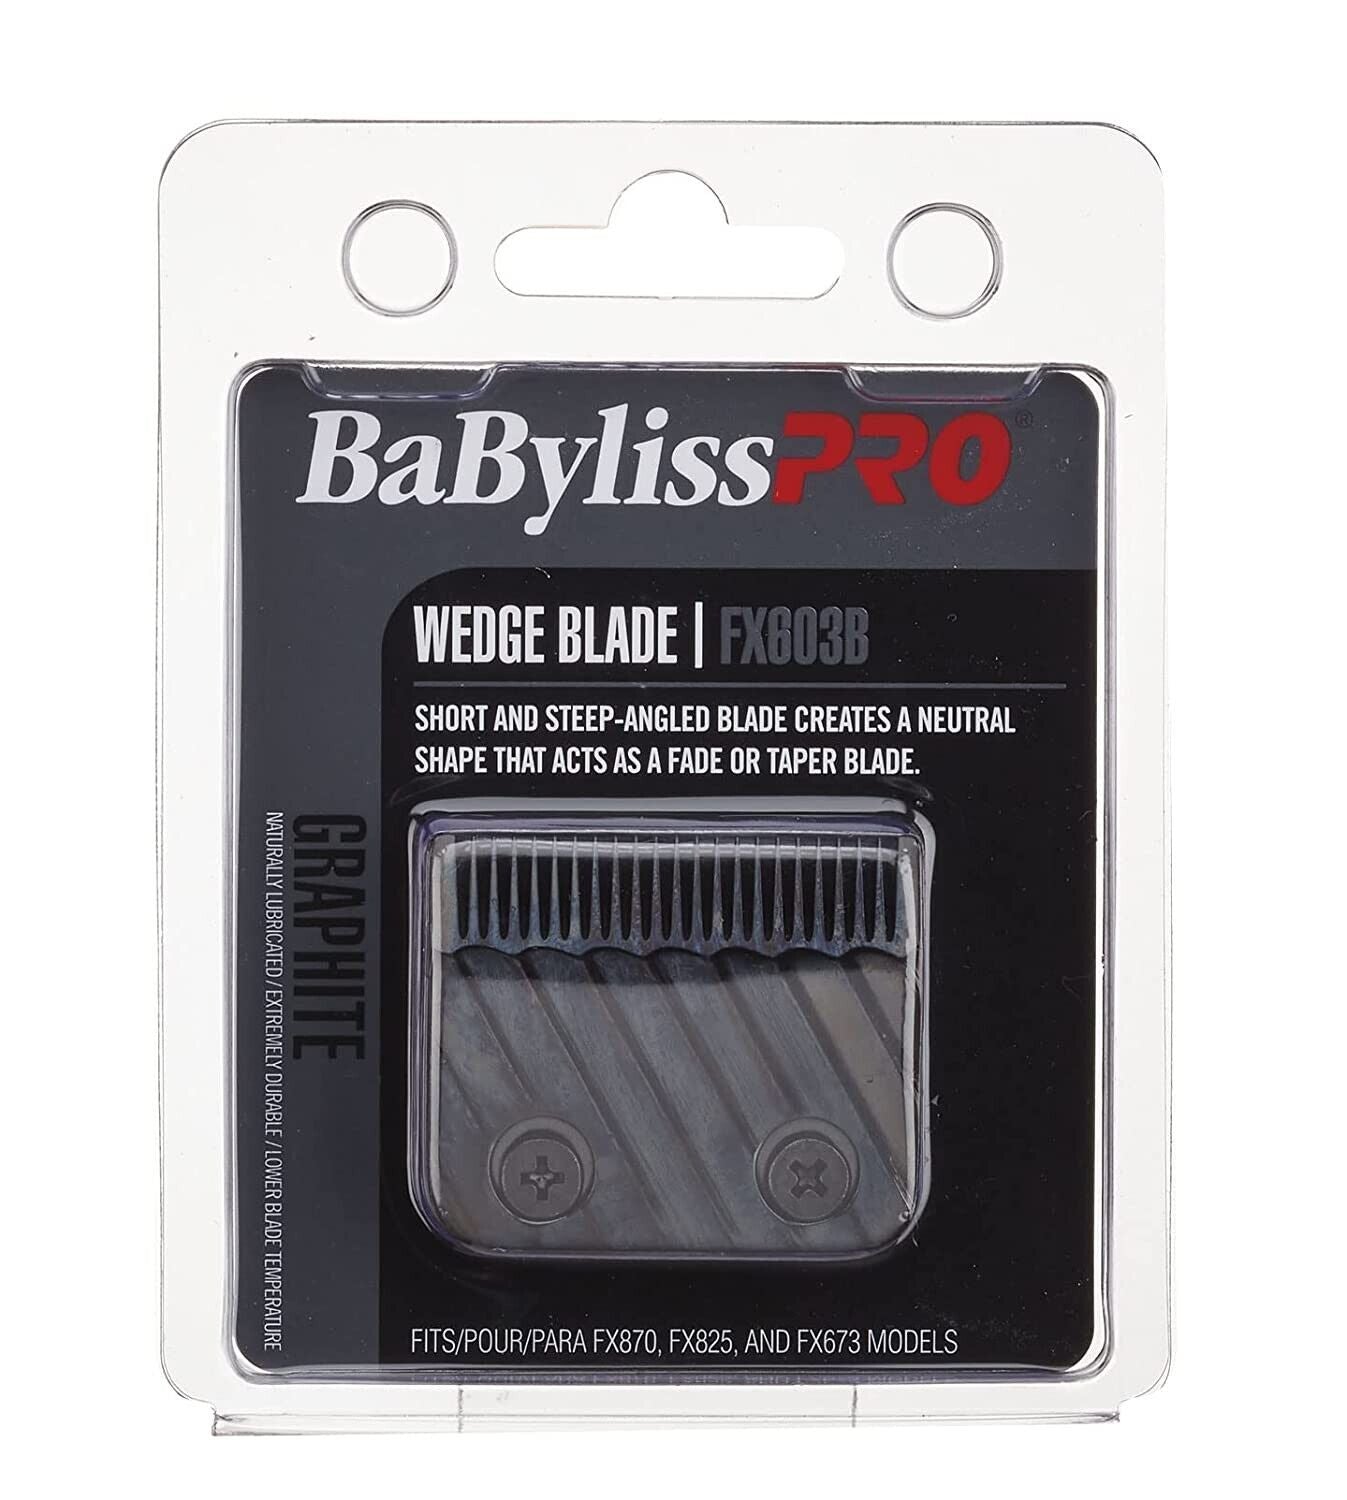 BabylissPRO Replacement Hair Clipper Wedge Blade FX603B